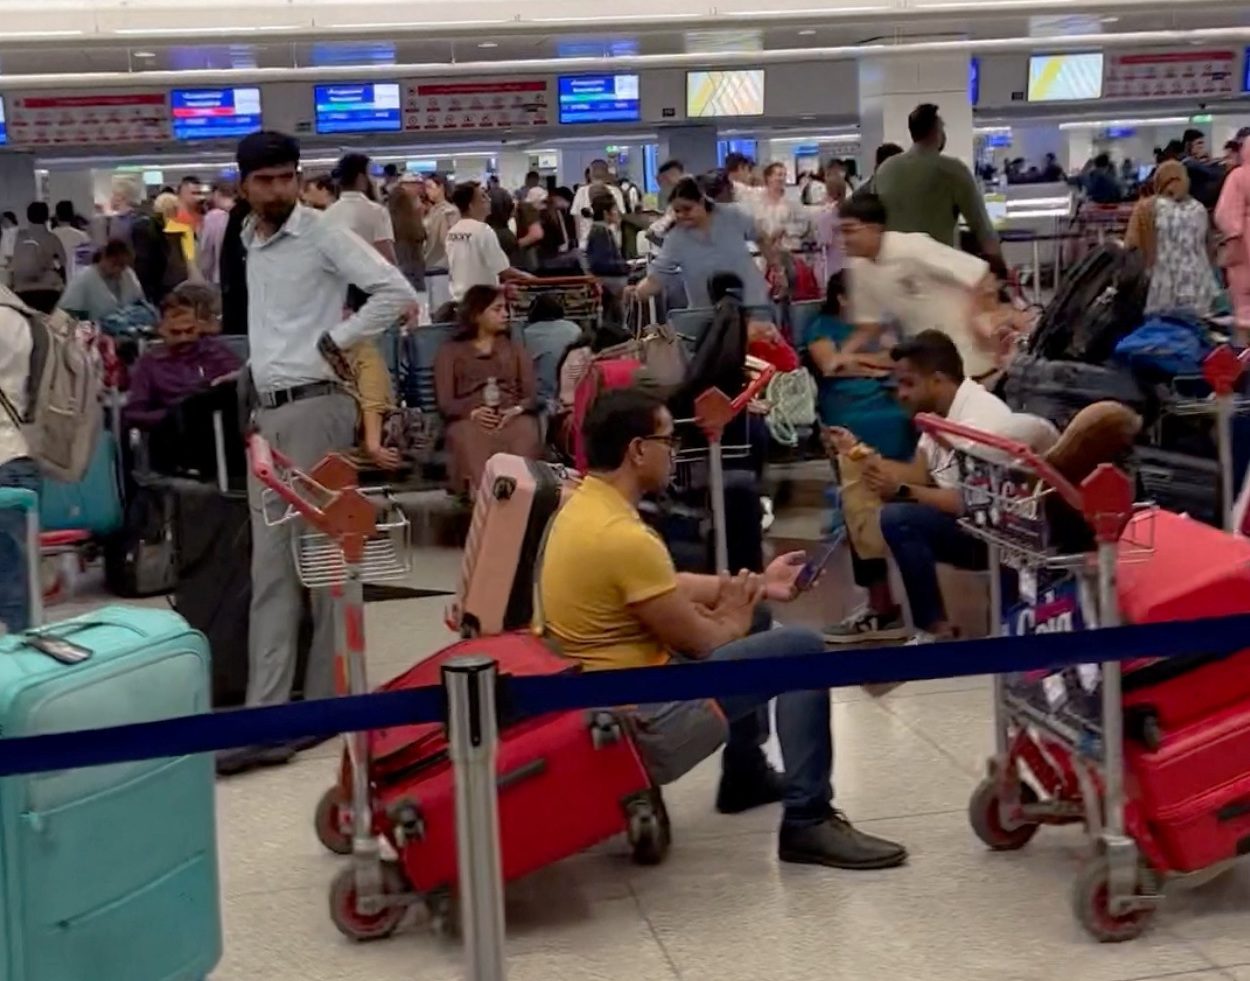 Dubai airport resumes normal operations after global outage hits check-in desks